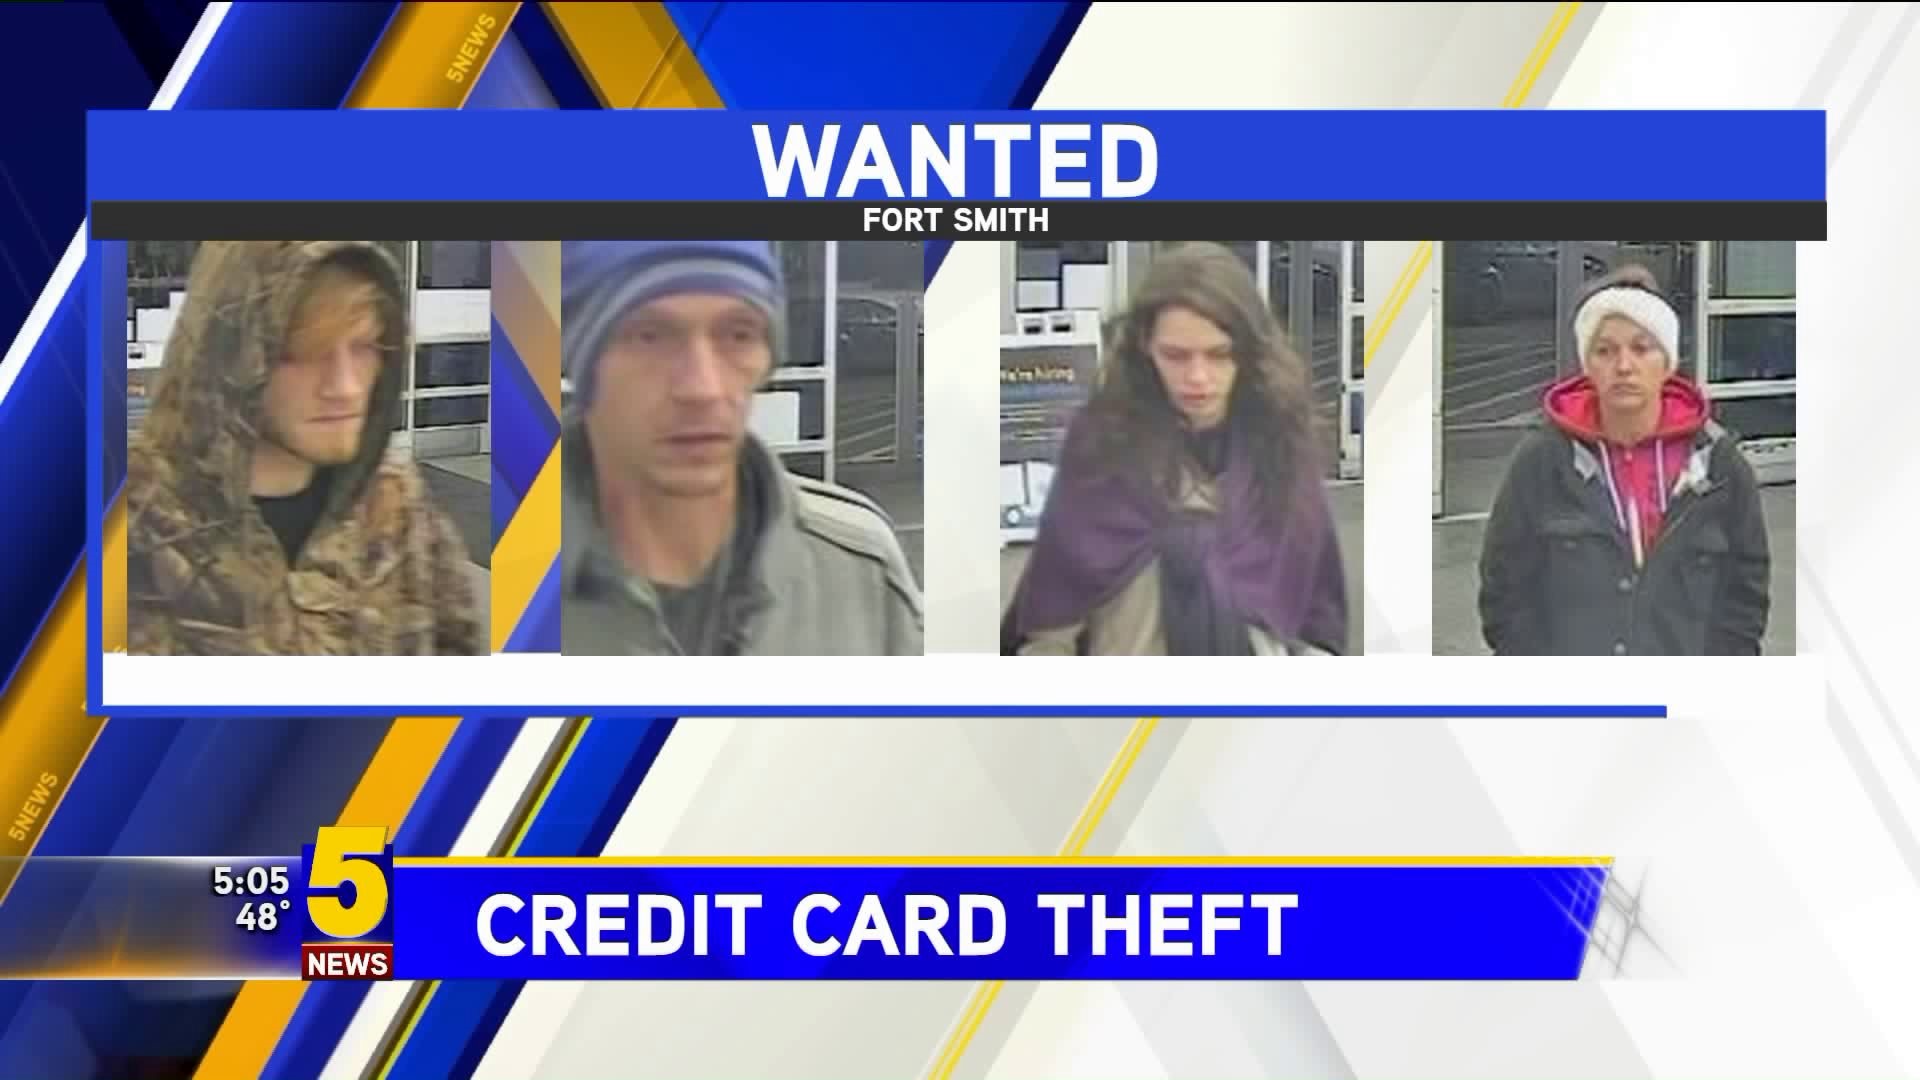 Fort Smith Credit Card Theft